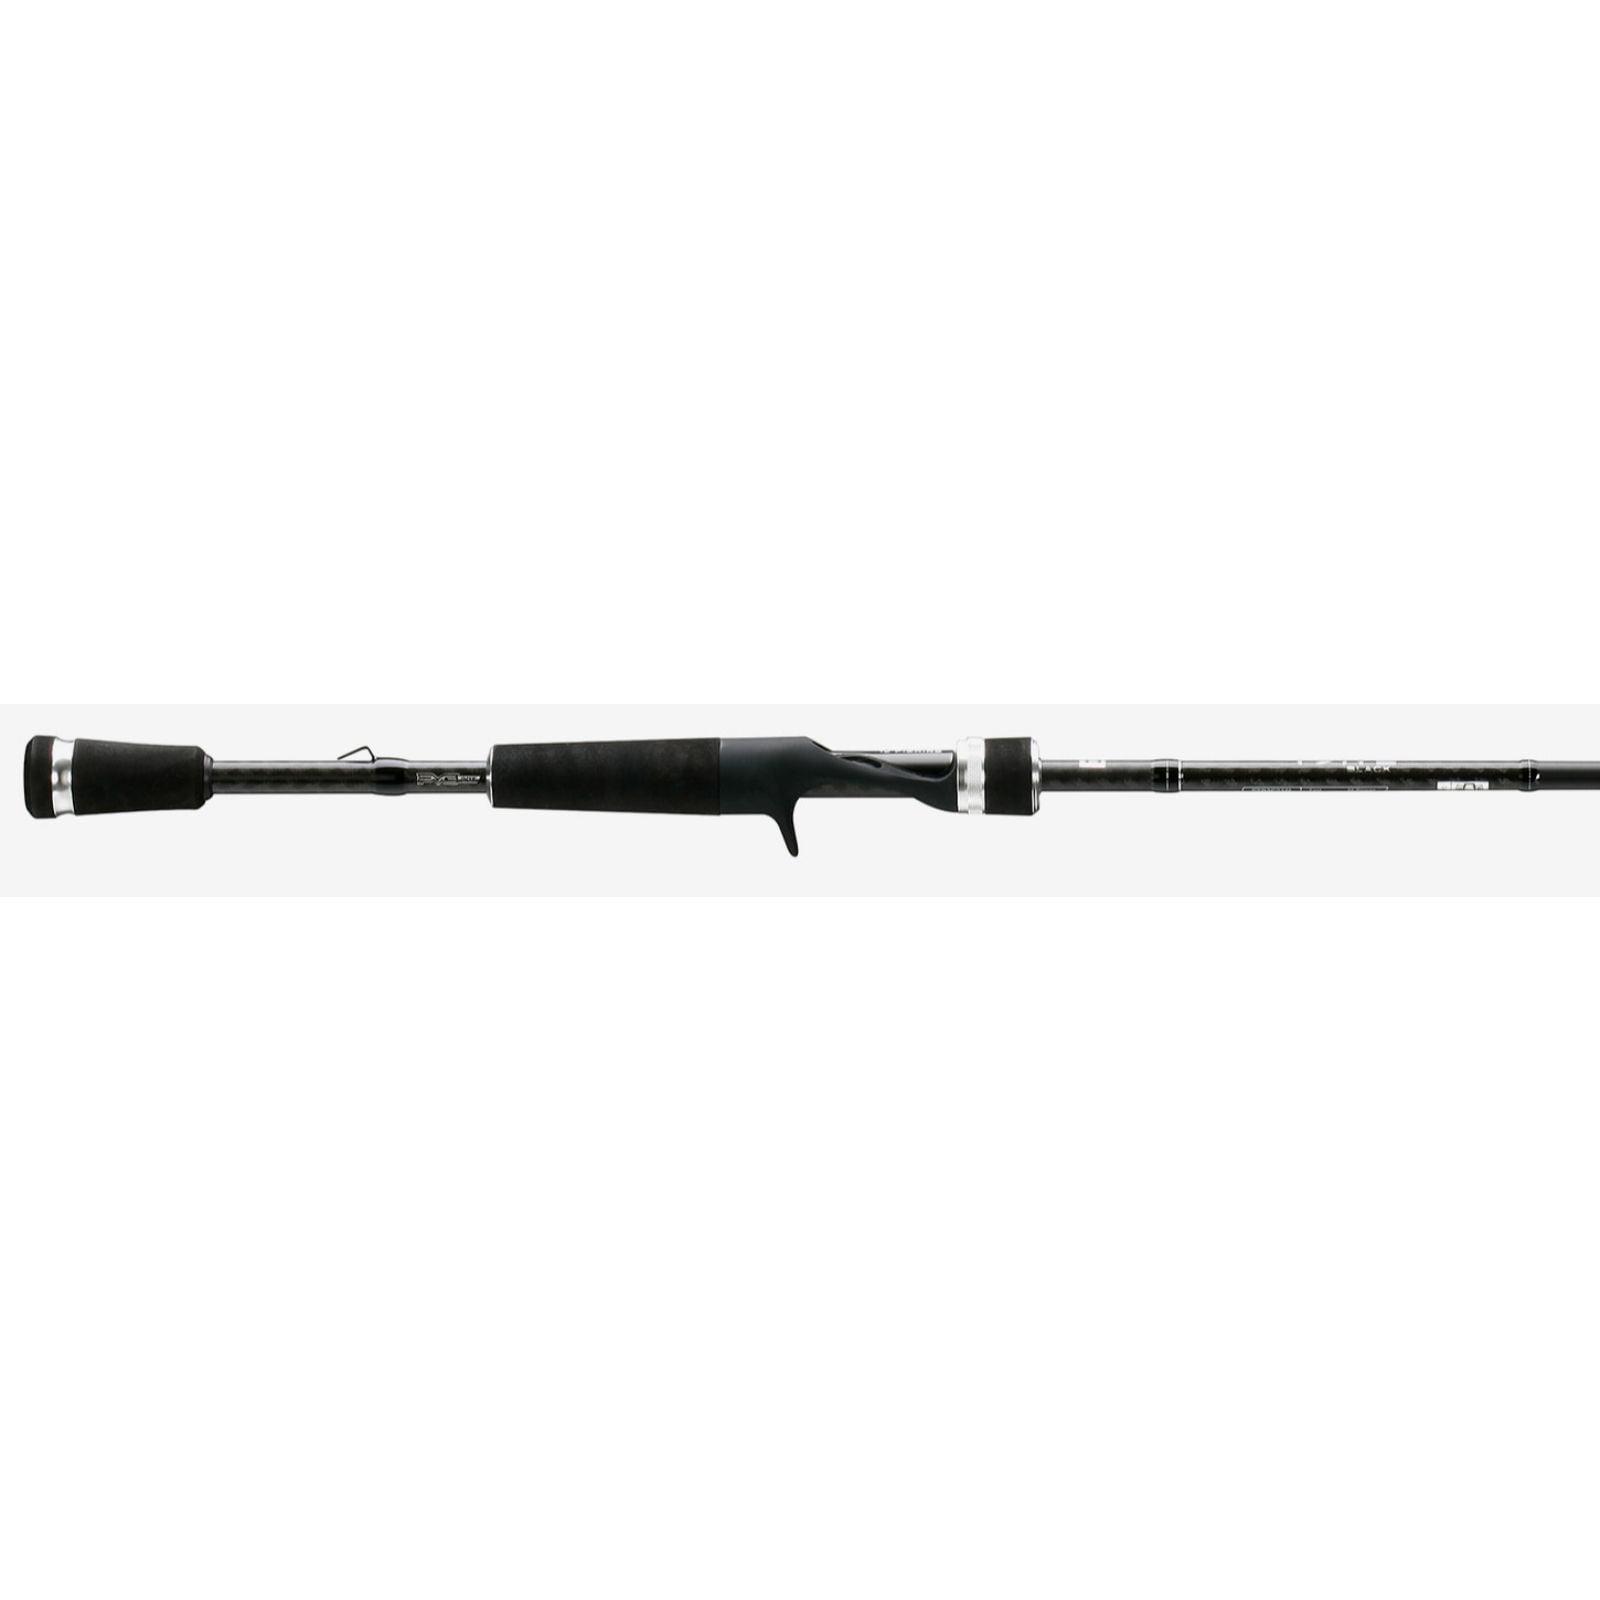 13 Fishing Fate Black 7 Ft. 6 In. MH Casting Rod Promo